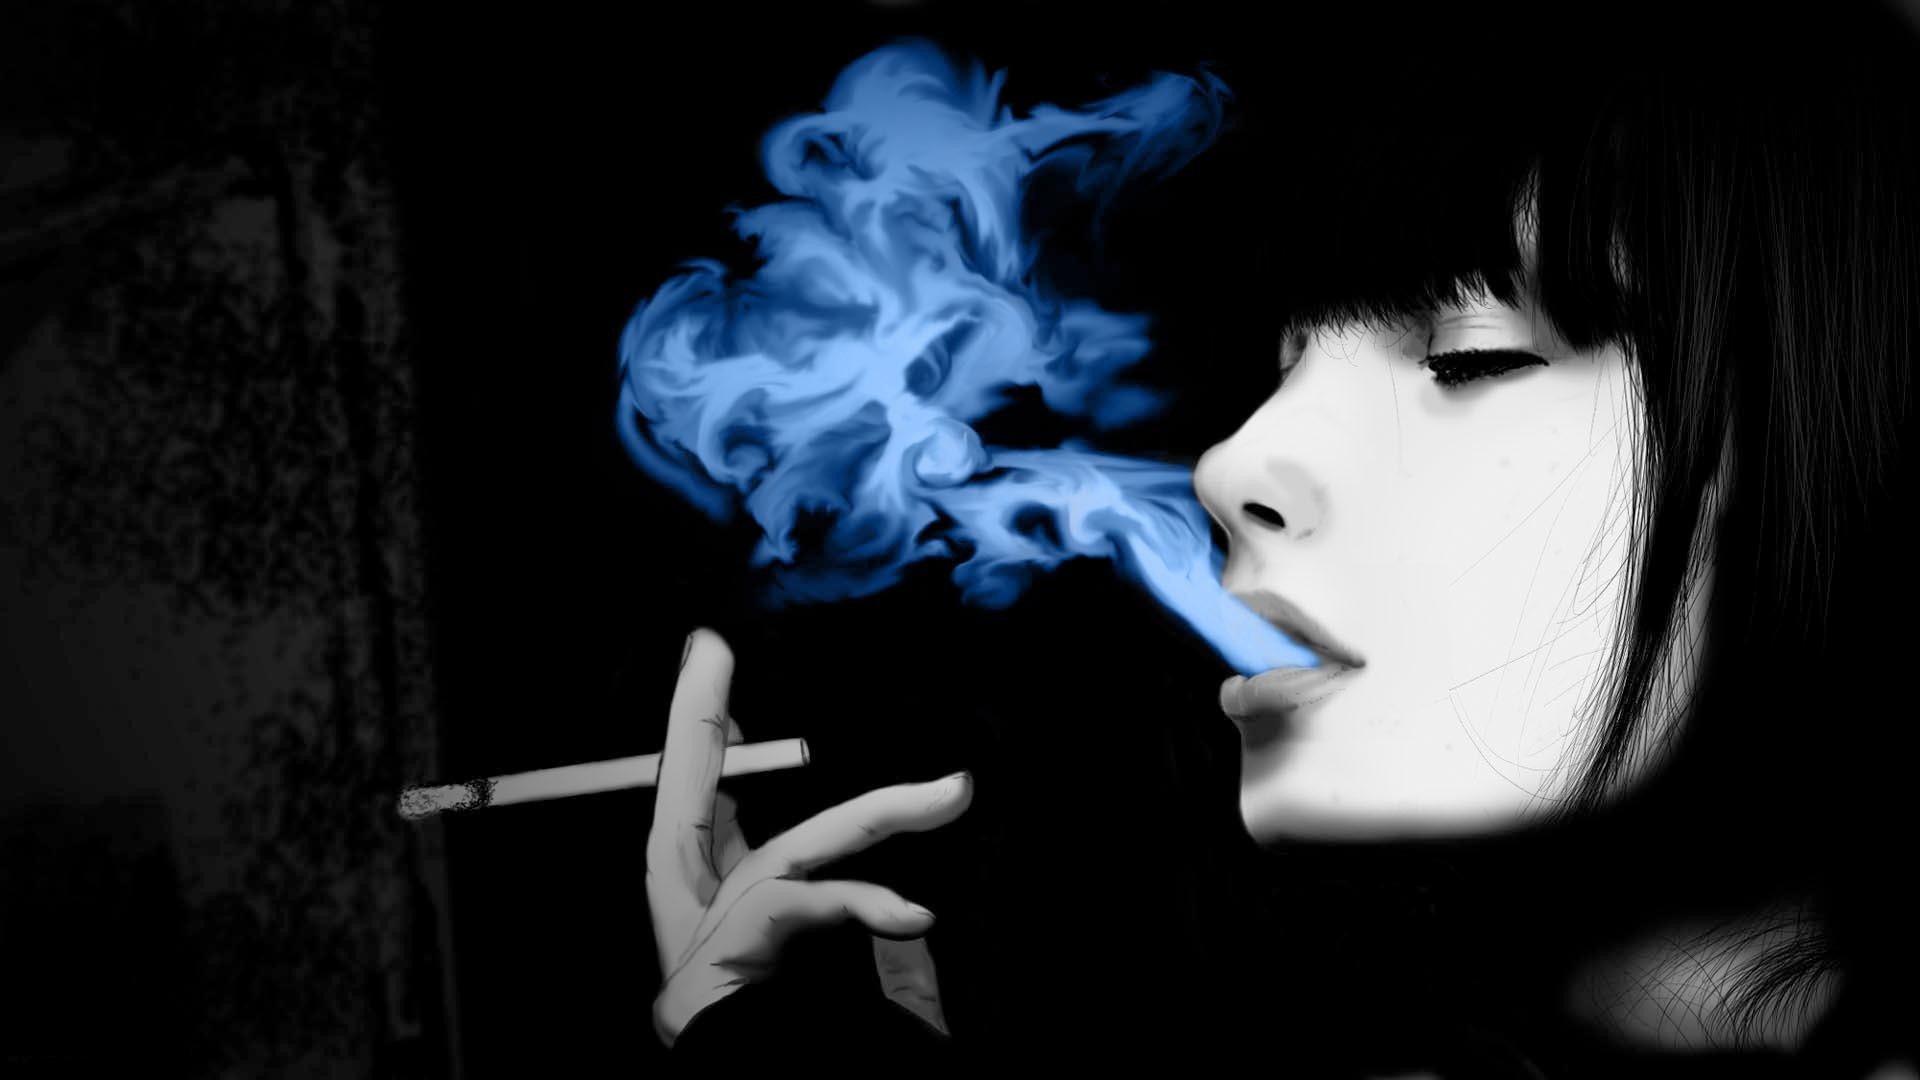  on August 5 2015 By Stephen Comments Off on Smoking HD Wallpapers